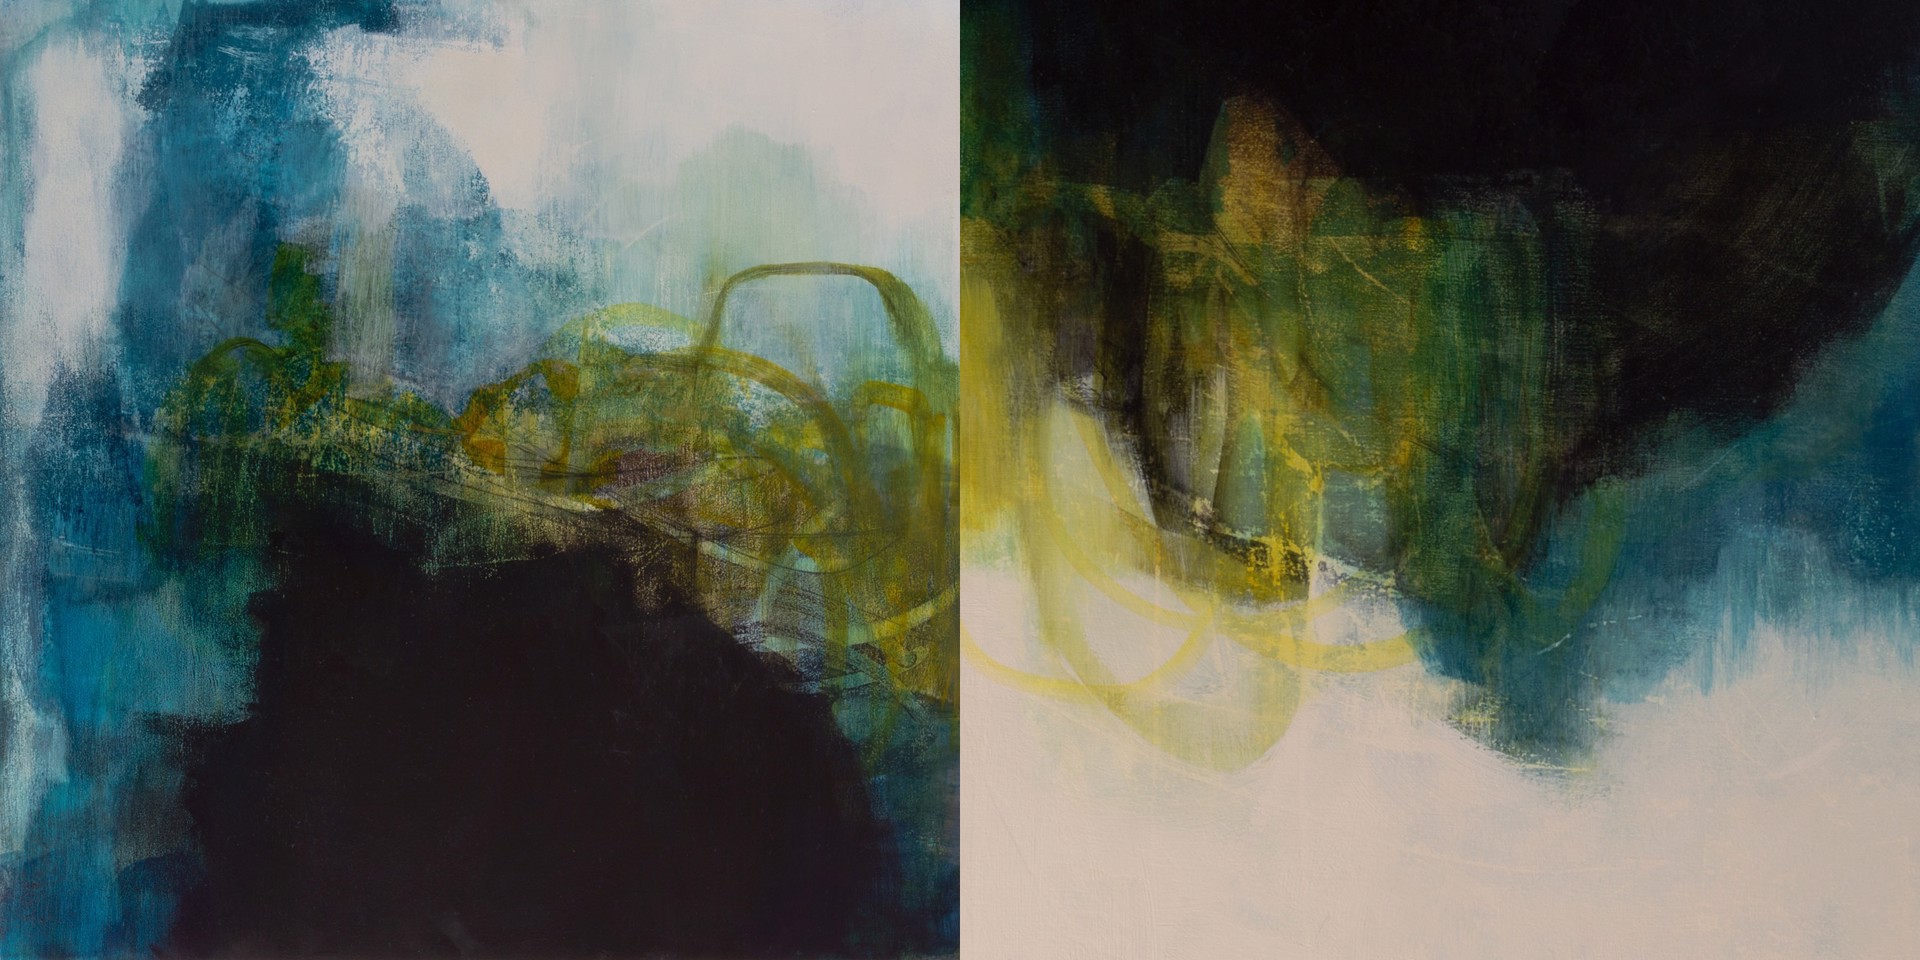 Out of Stillness (diptych) by Kat Green